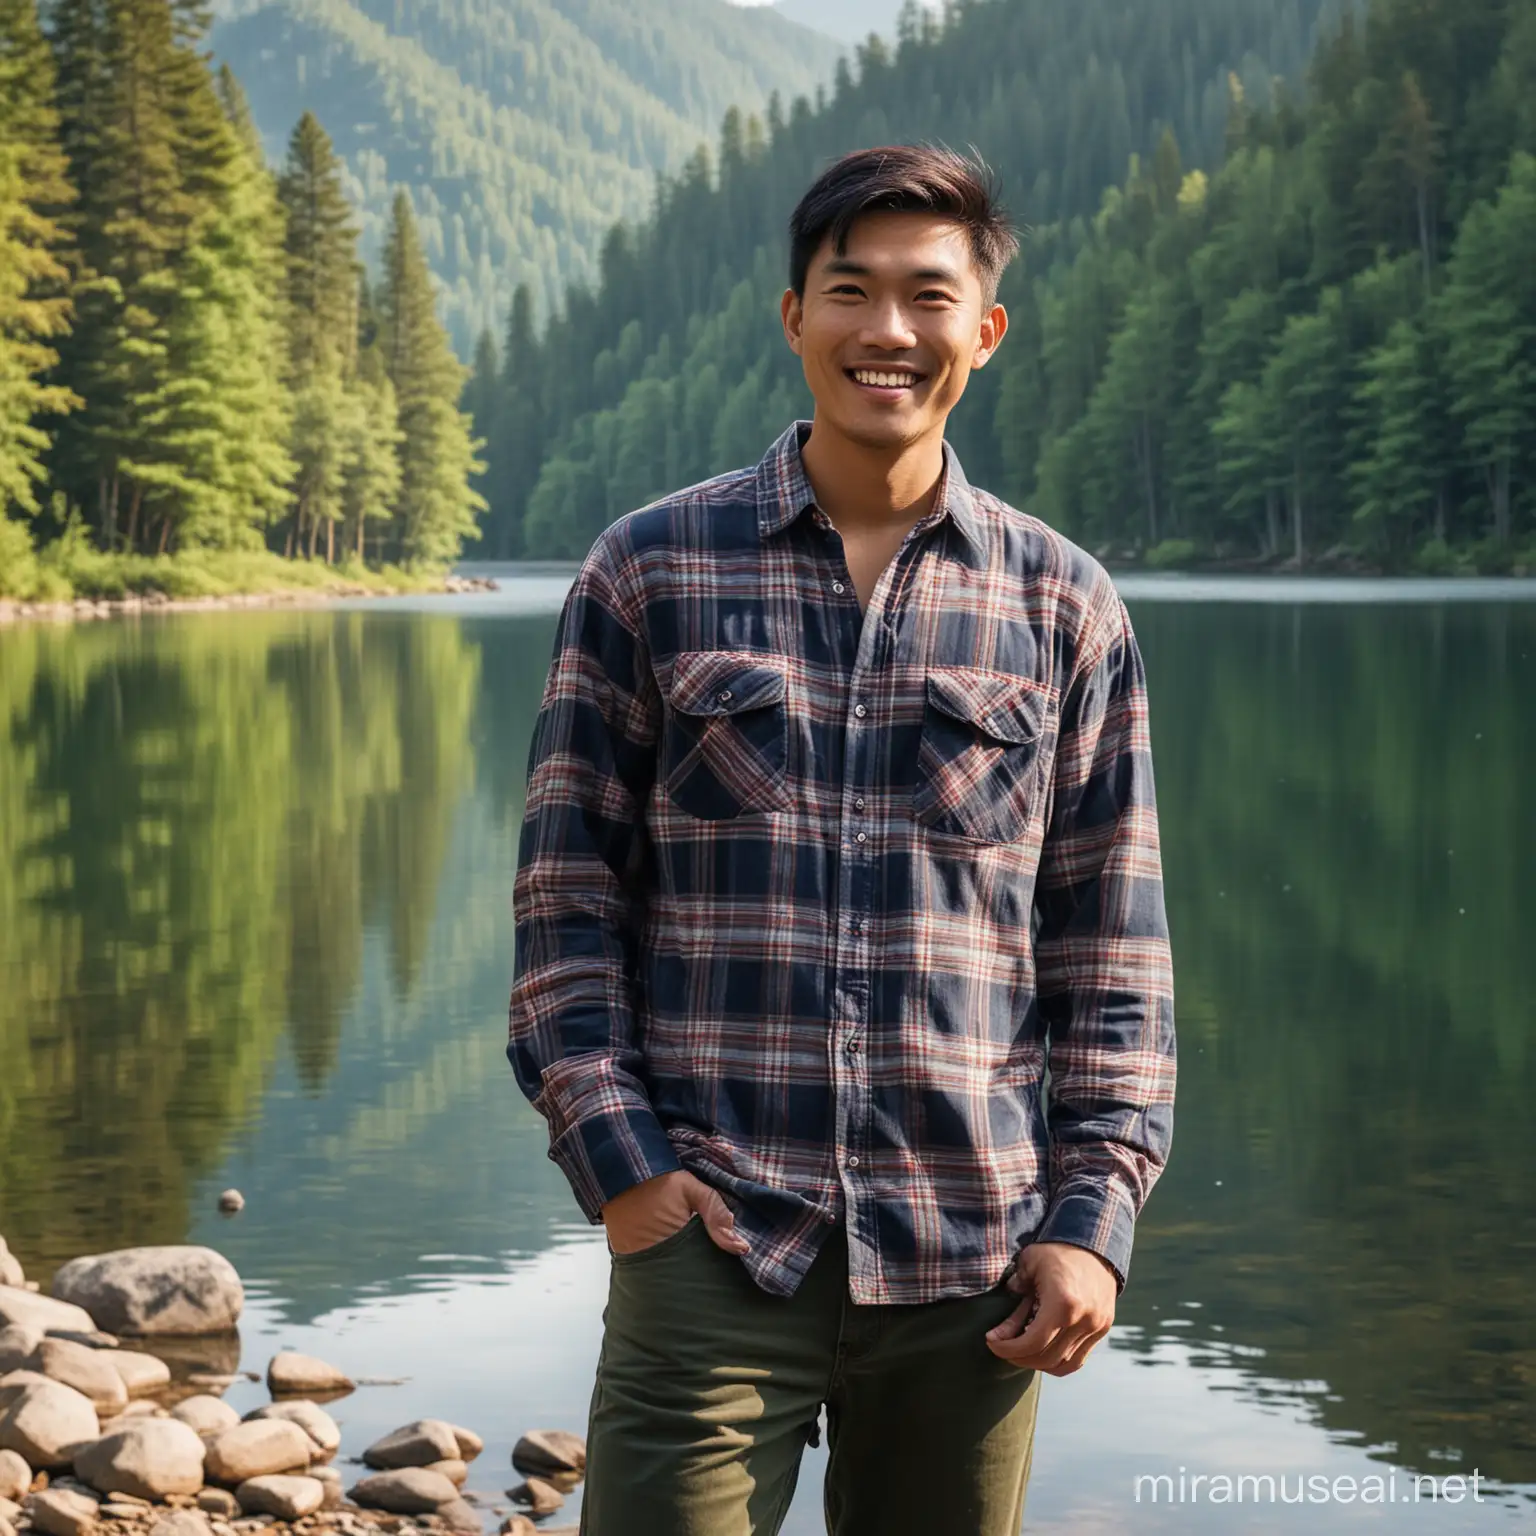 Smiling Asian Man in Flannel Shirt by Serene Lake